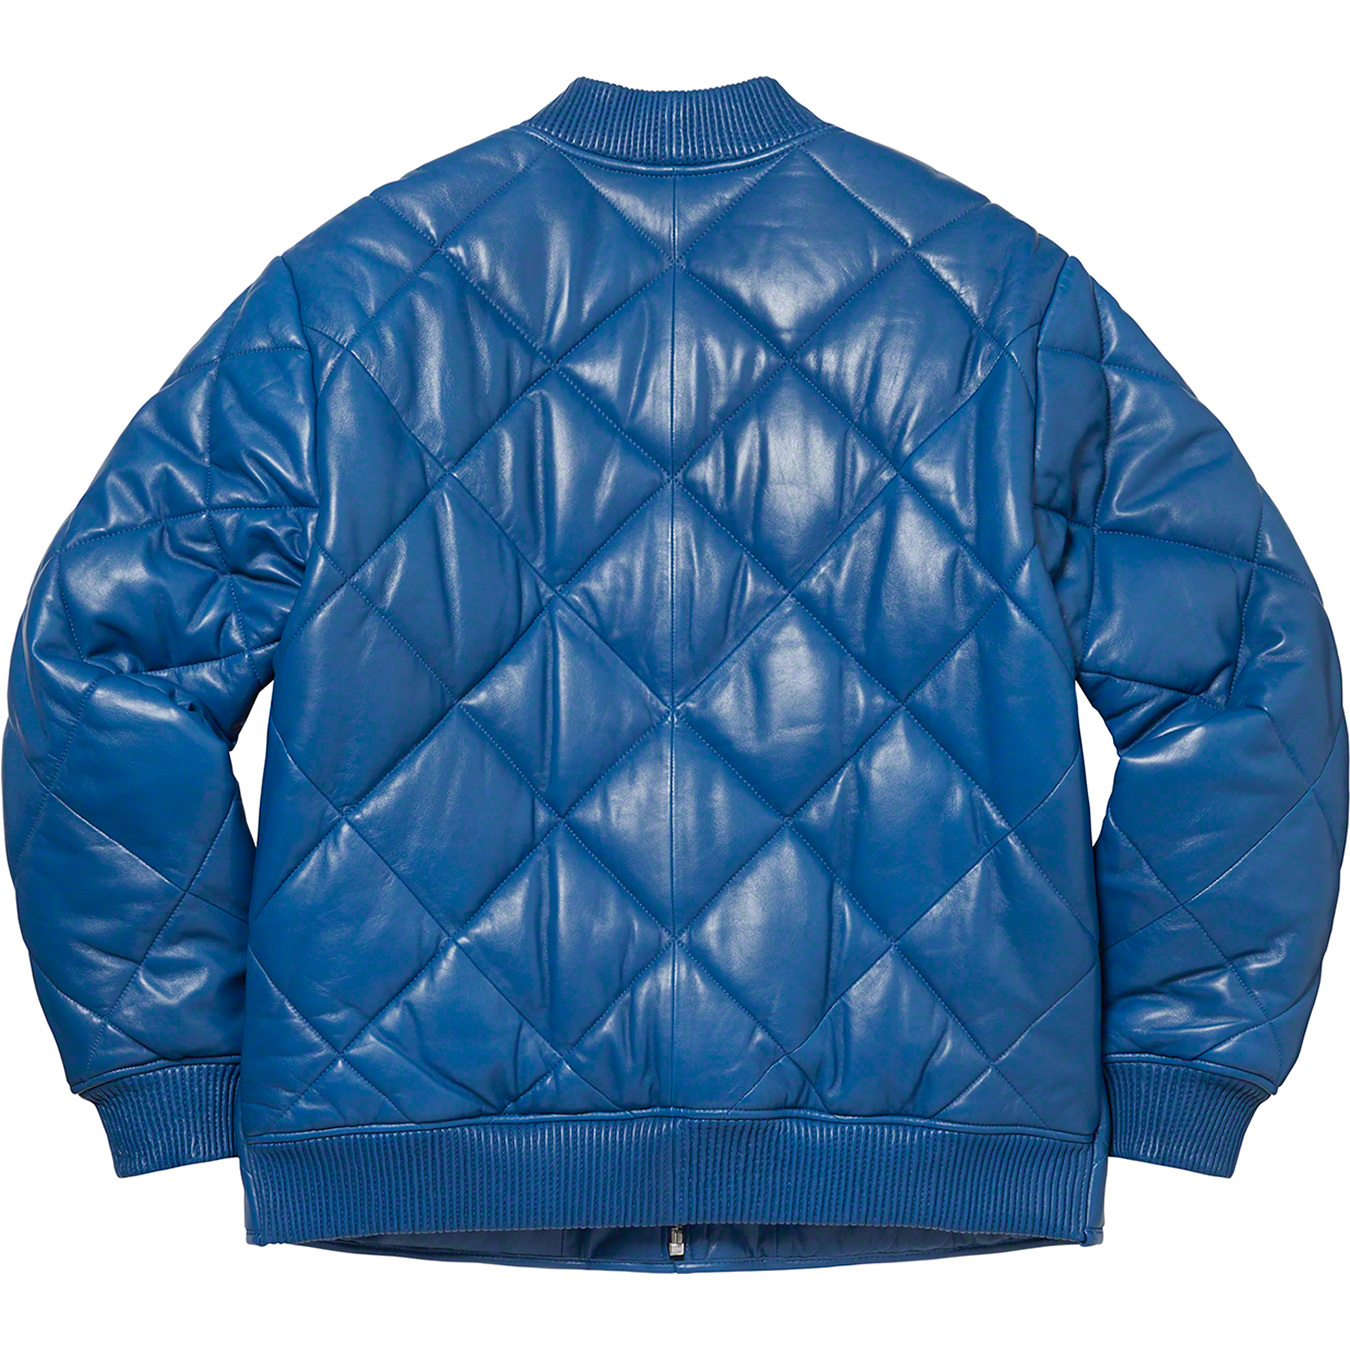 Supreme Quilted Leather Work Jacket